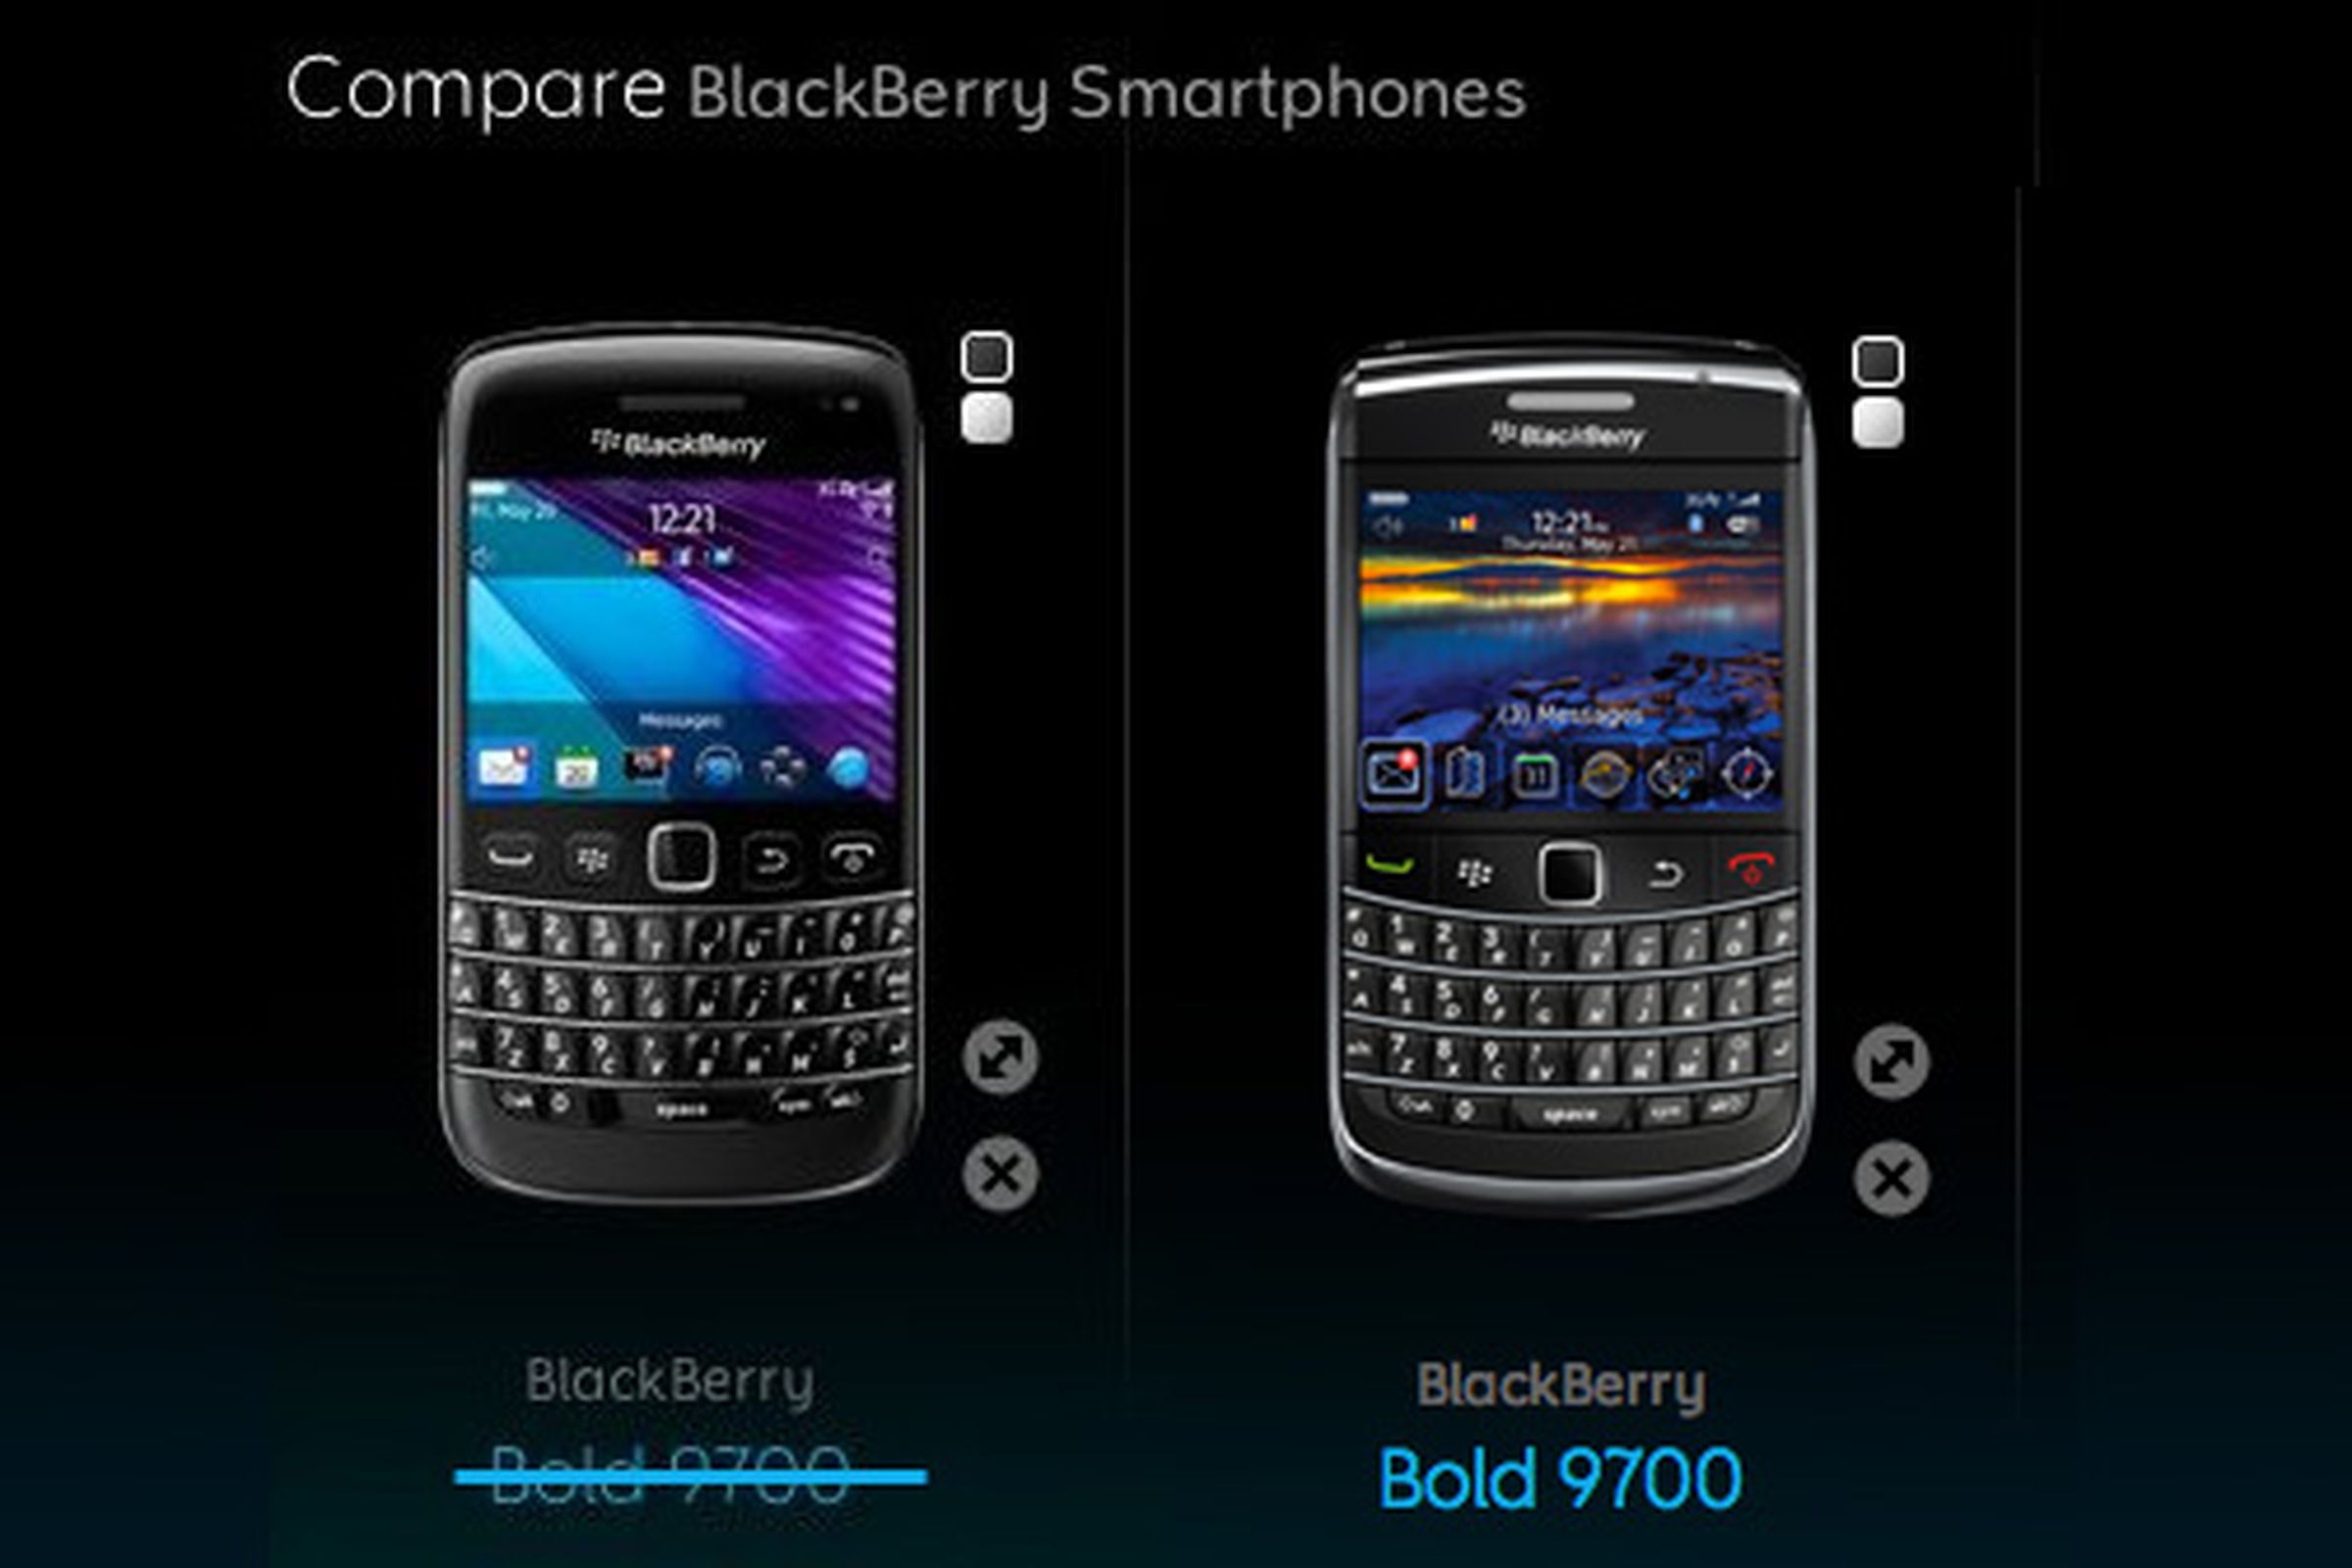 BlackBerry Bold 9790 and 9700